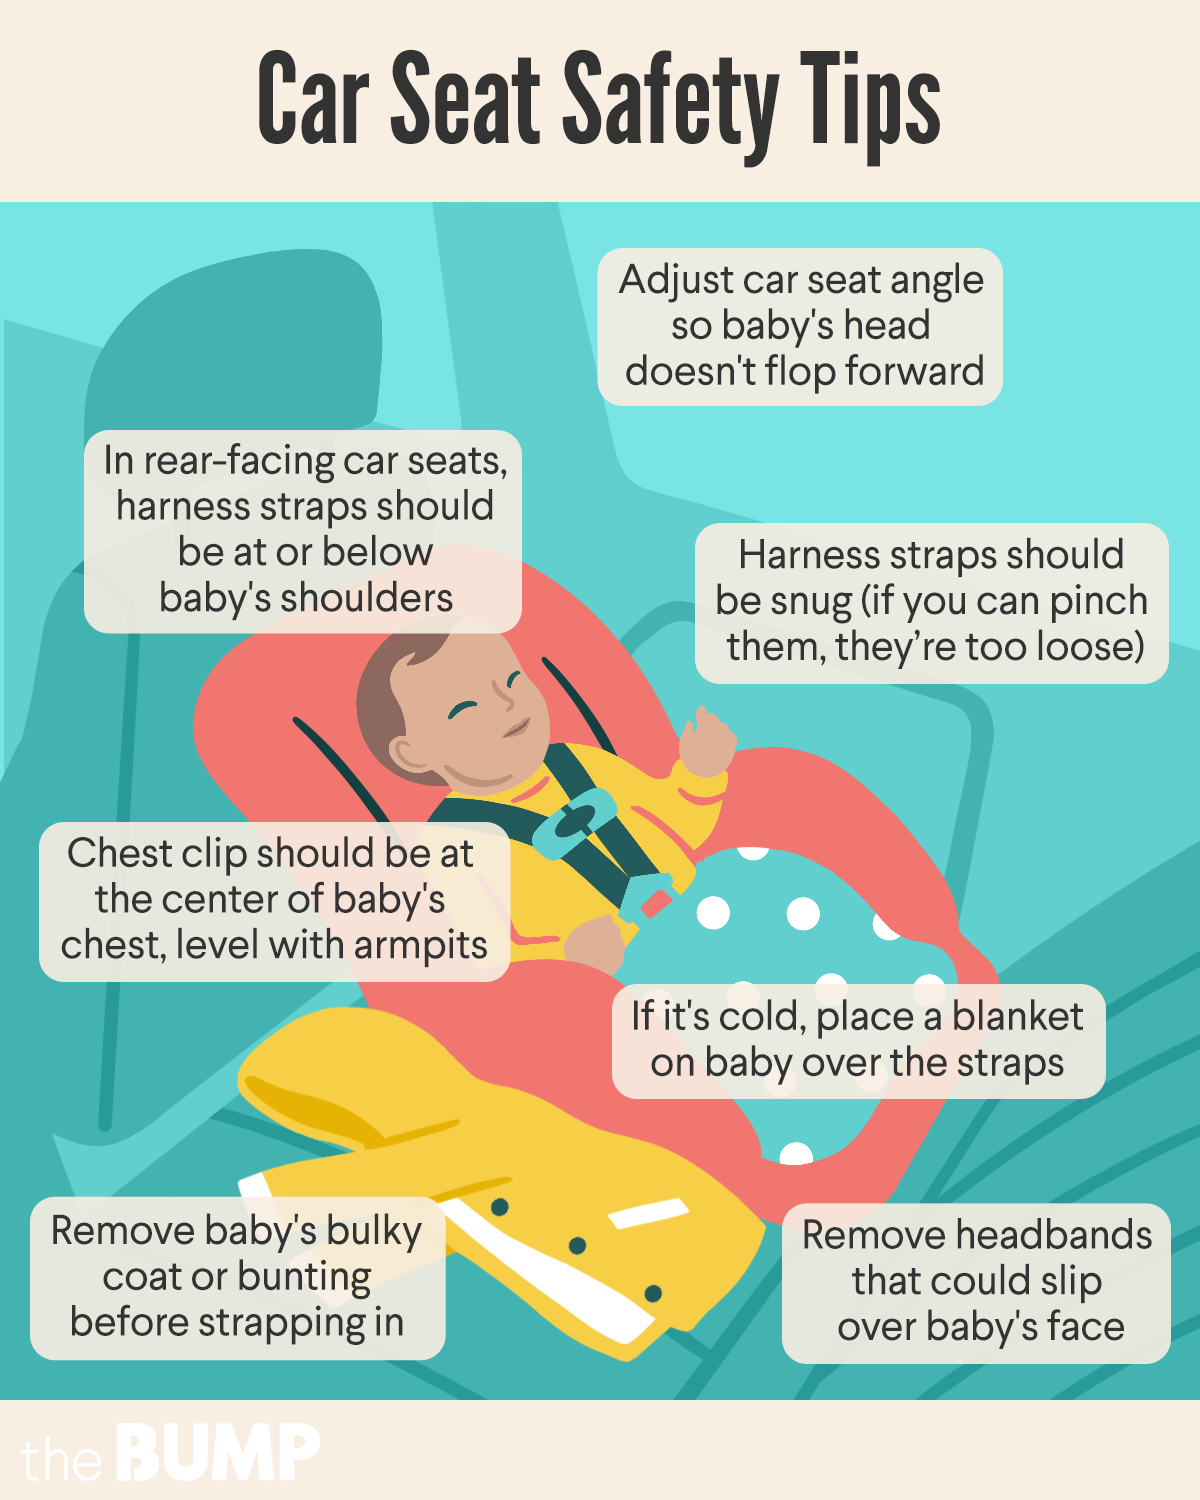 Car Seat Expiration How Long Are, Is It Illegal To Use Expired Car Seats